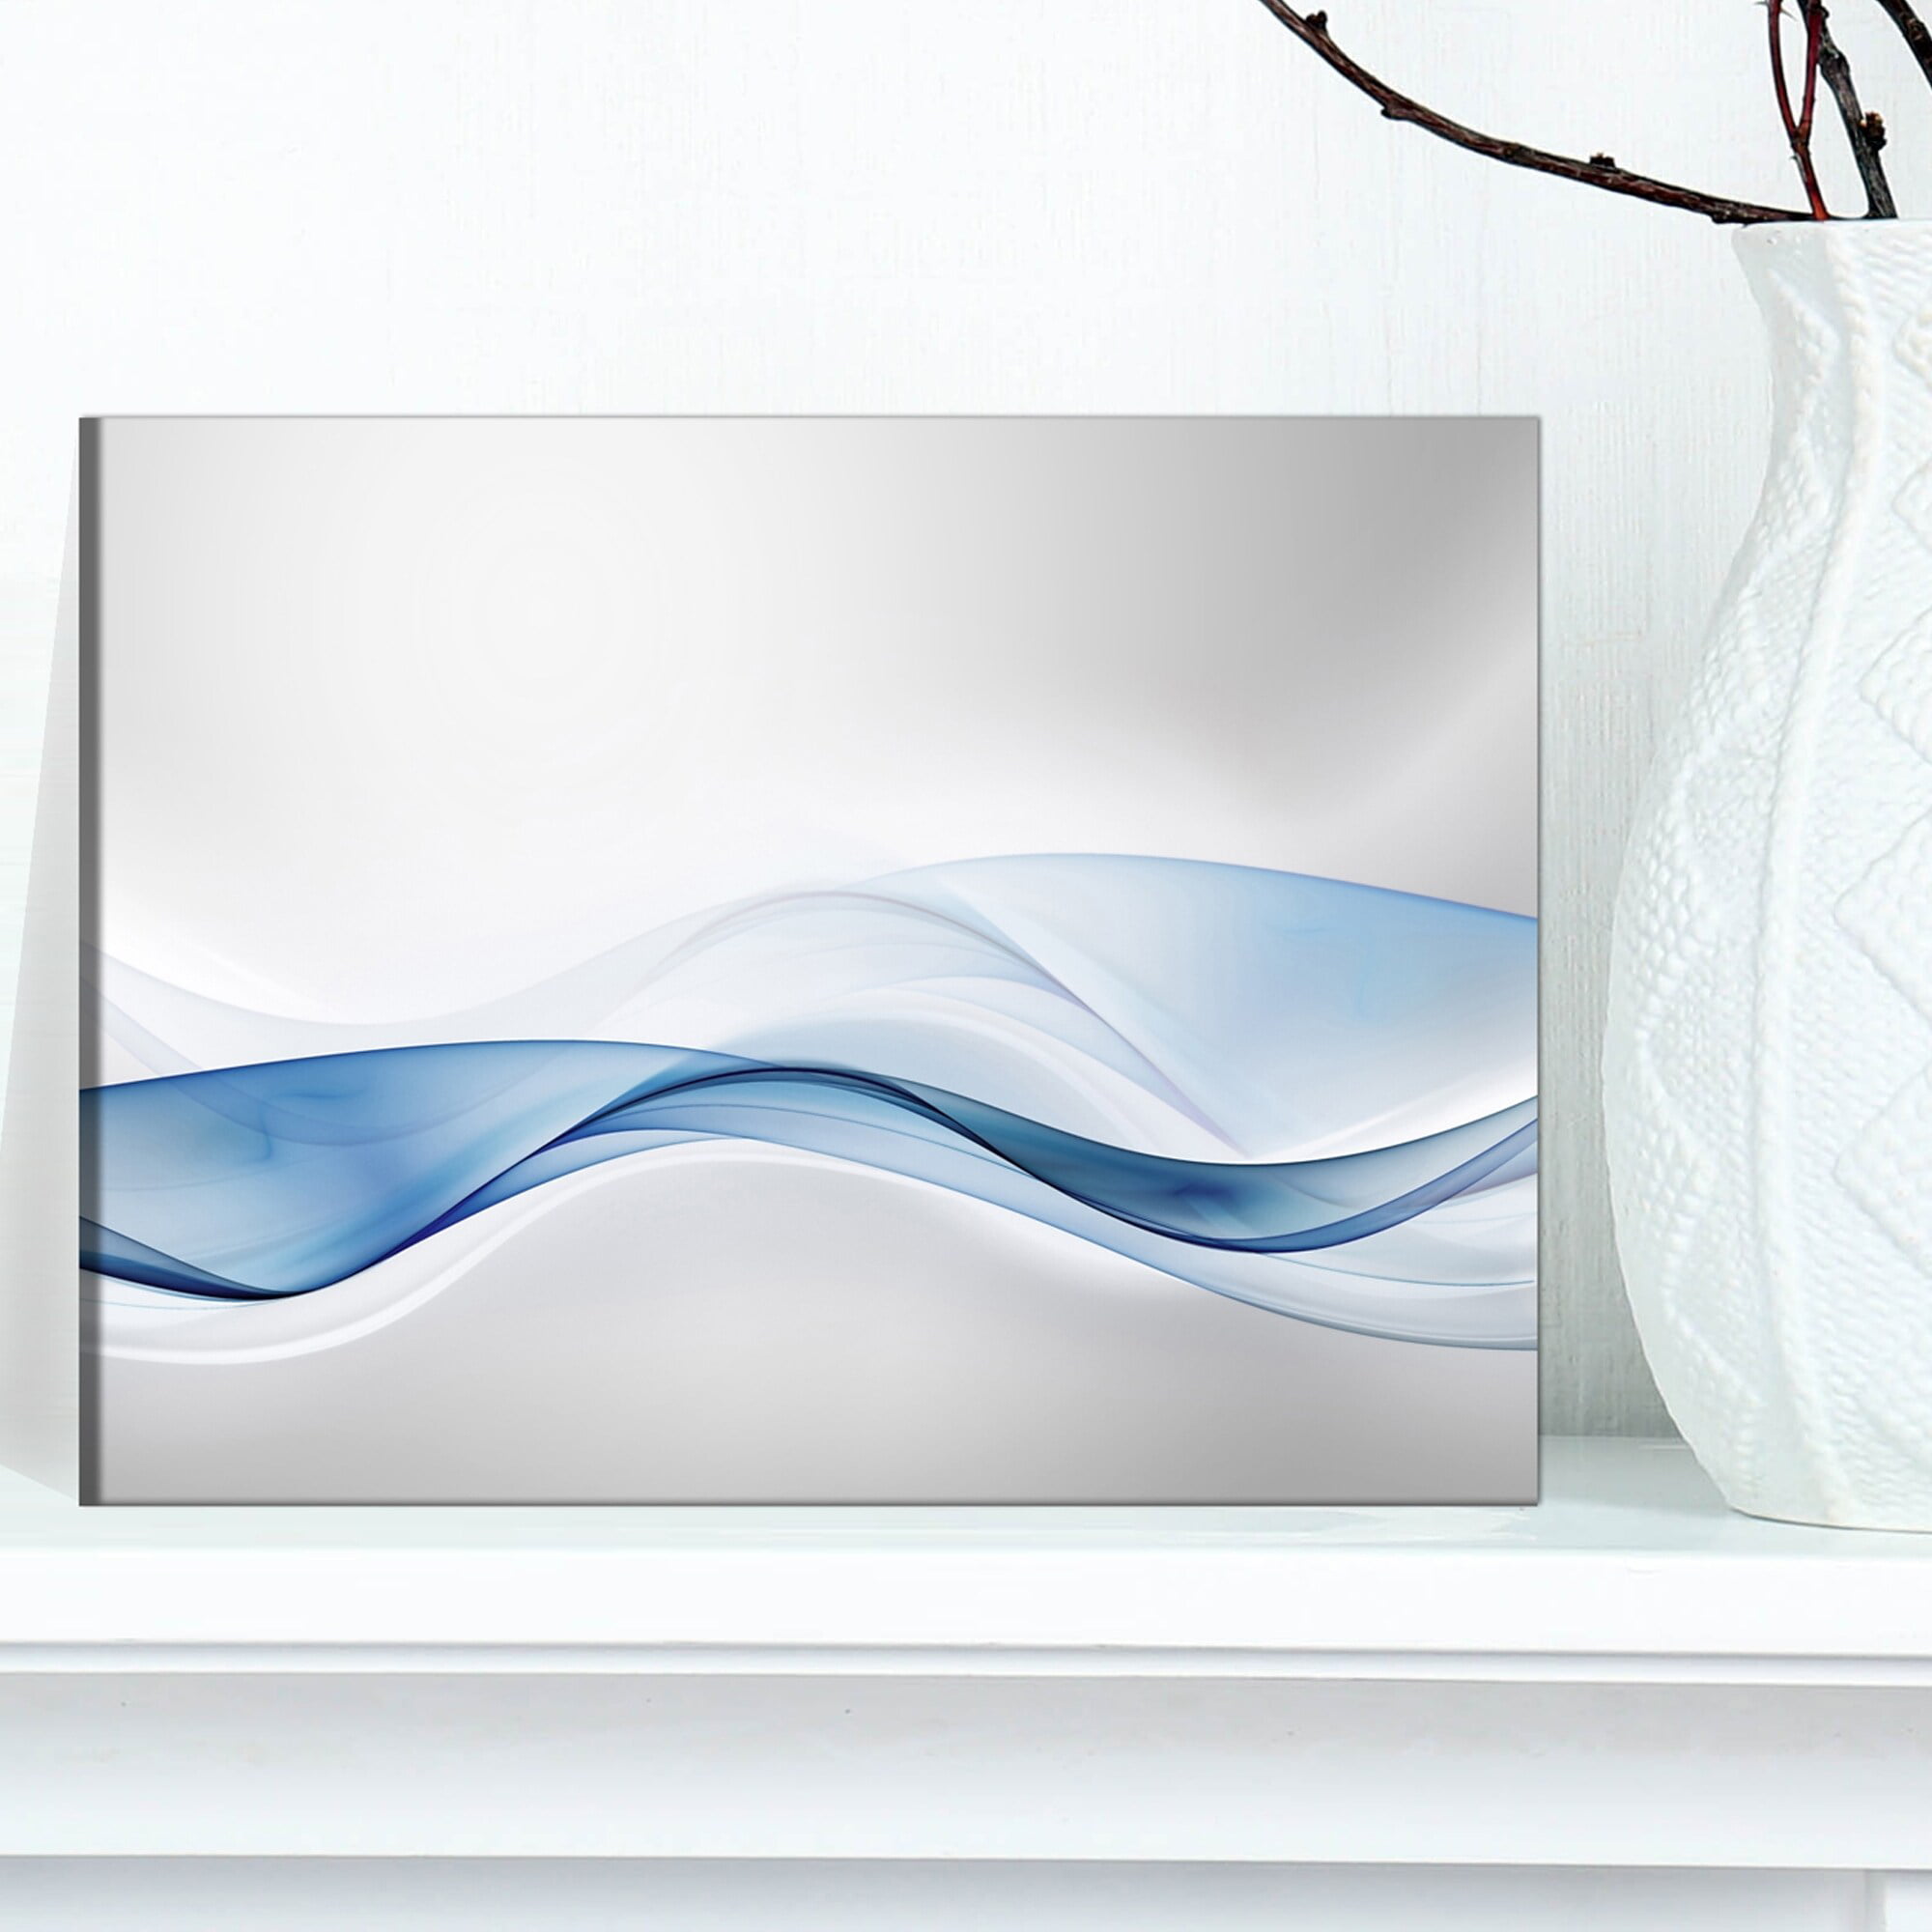 Vehicle Splashing Out Water 3.2 Wall Art Canvas Picture Print 